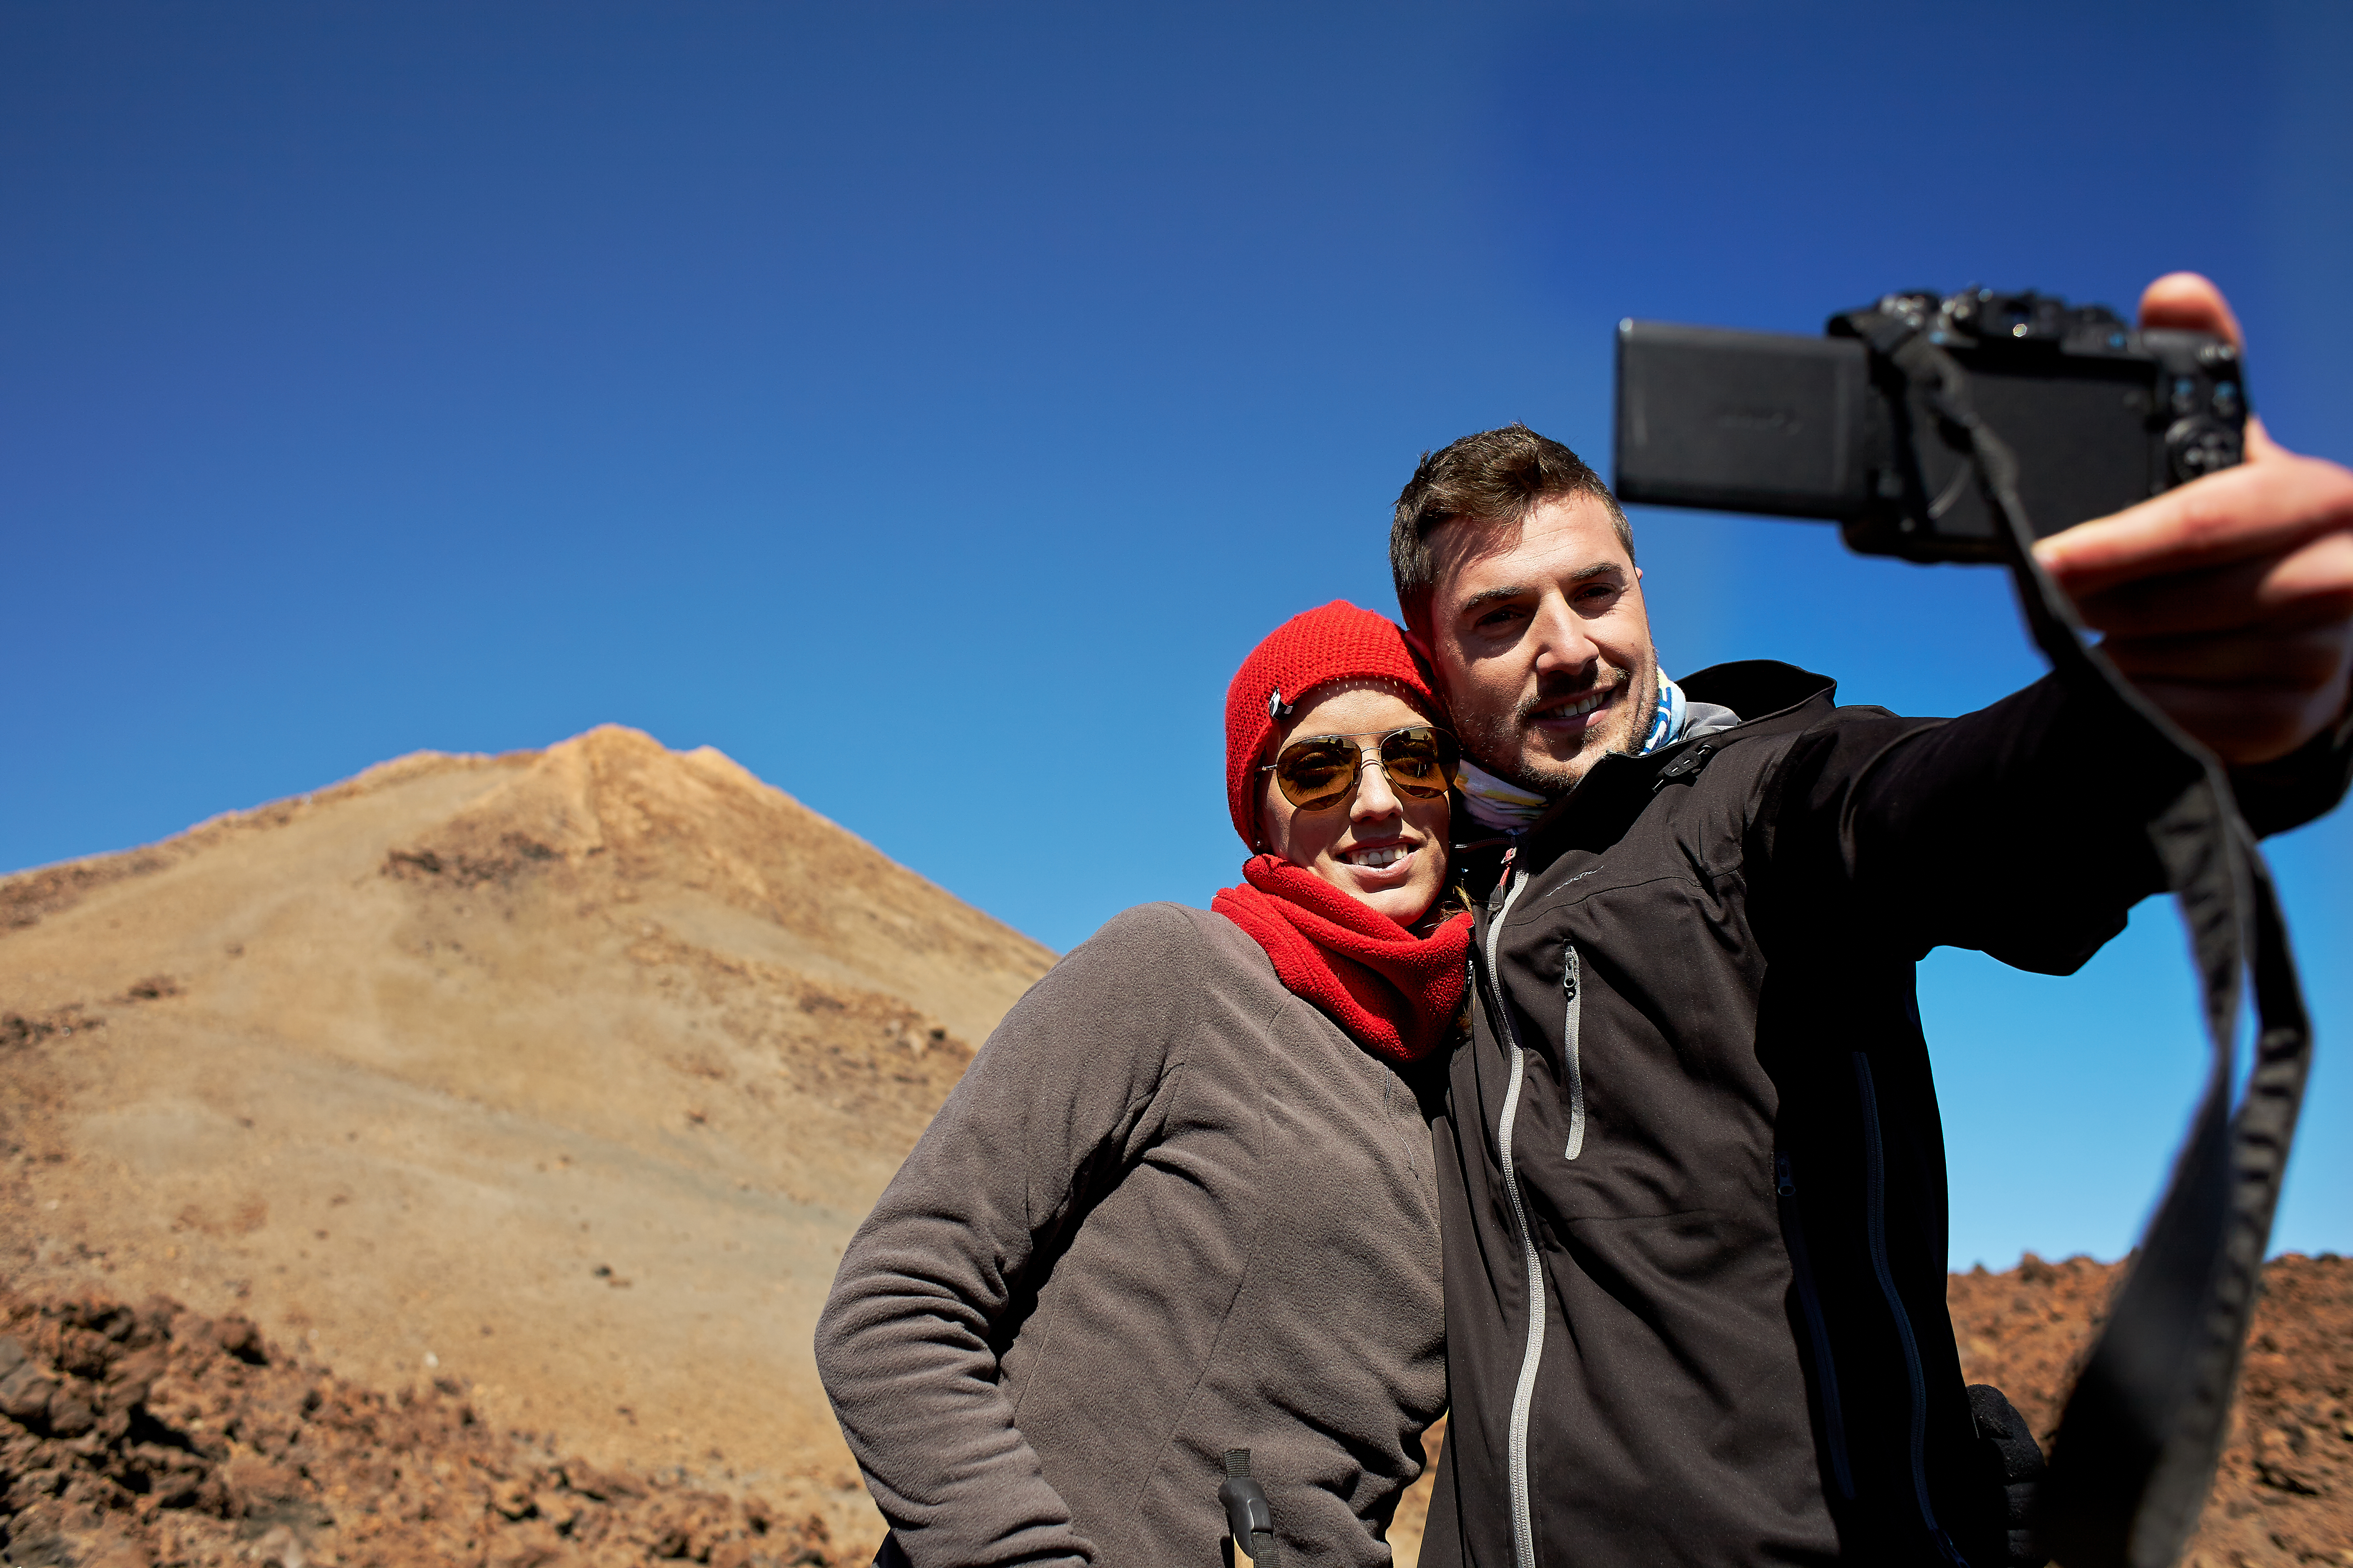 Ahoy explorer! If you are coming to Tenerife, you must see these guided visits of Teide